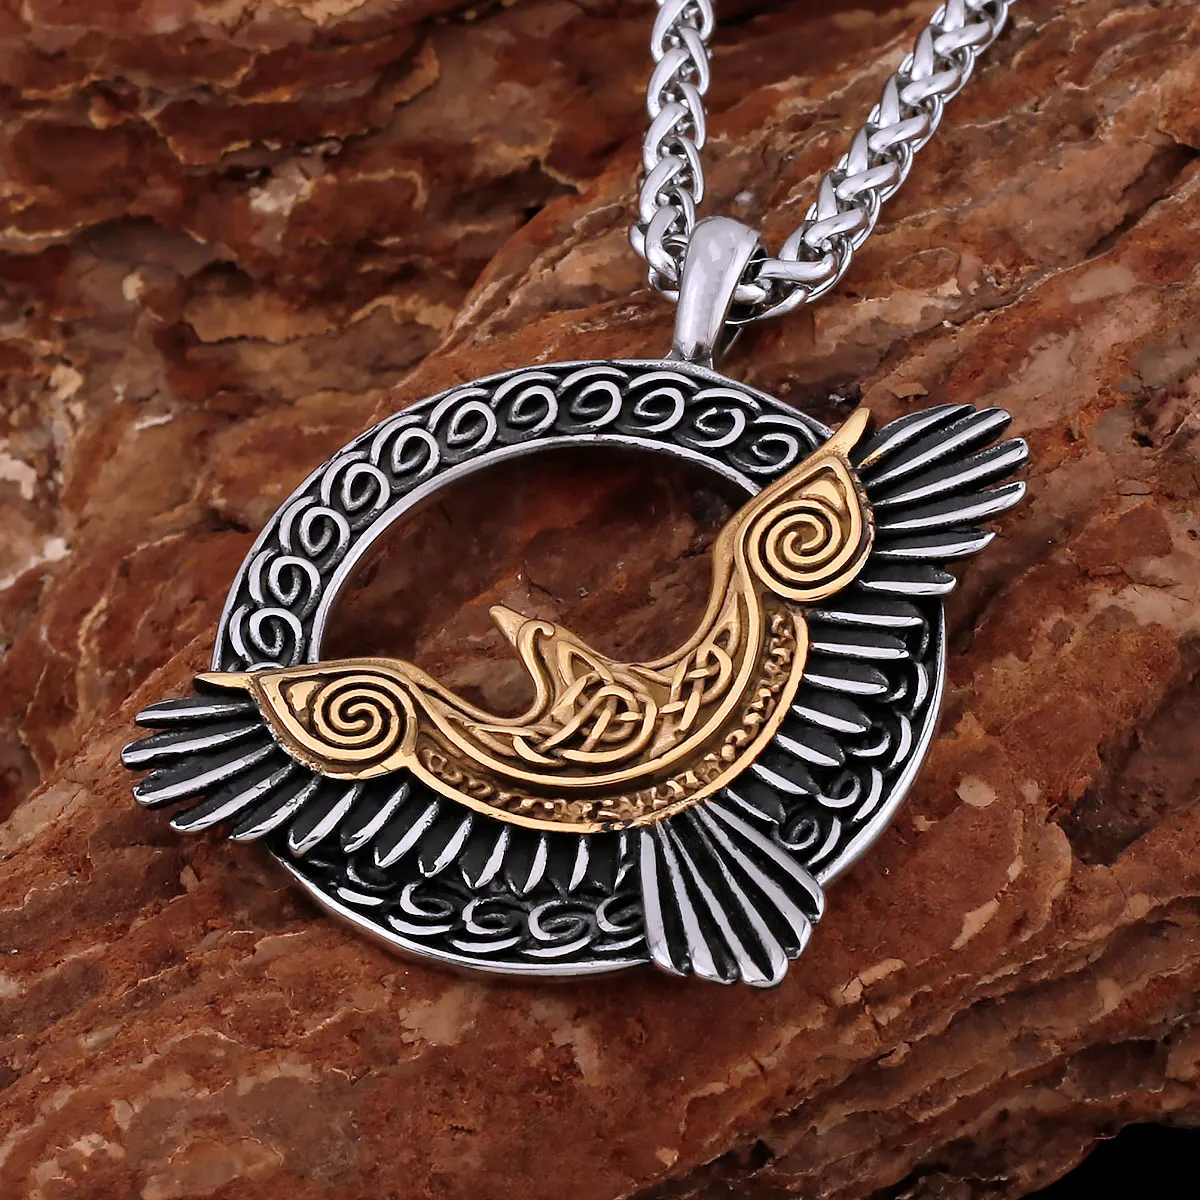 

New Odin Design Stainless Steel Retro Viking Animal Angel's Wings Crow Necklace Nordic Men's Amulet Jewelry Pendant Creative